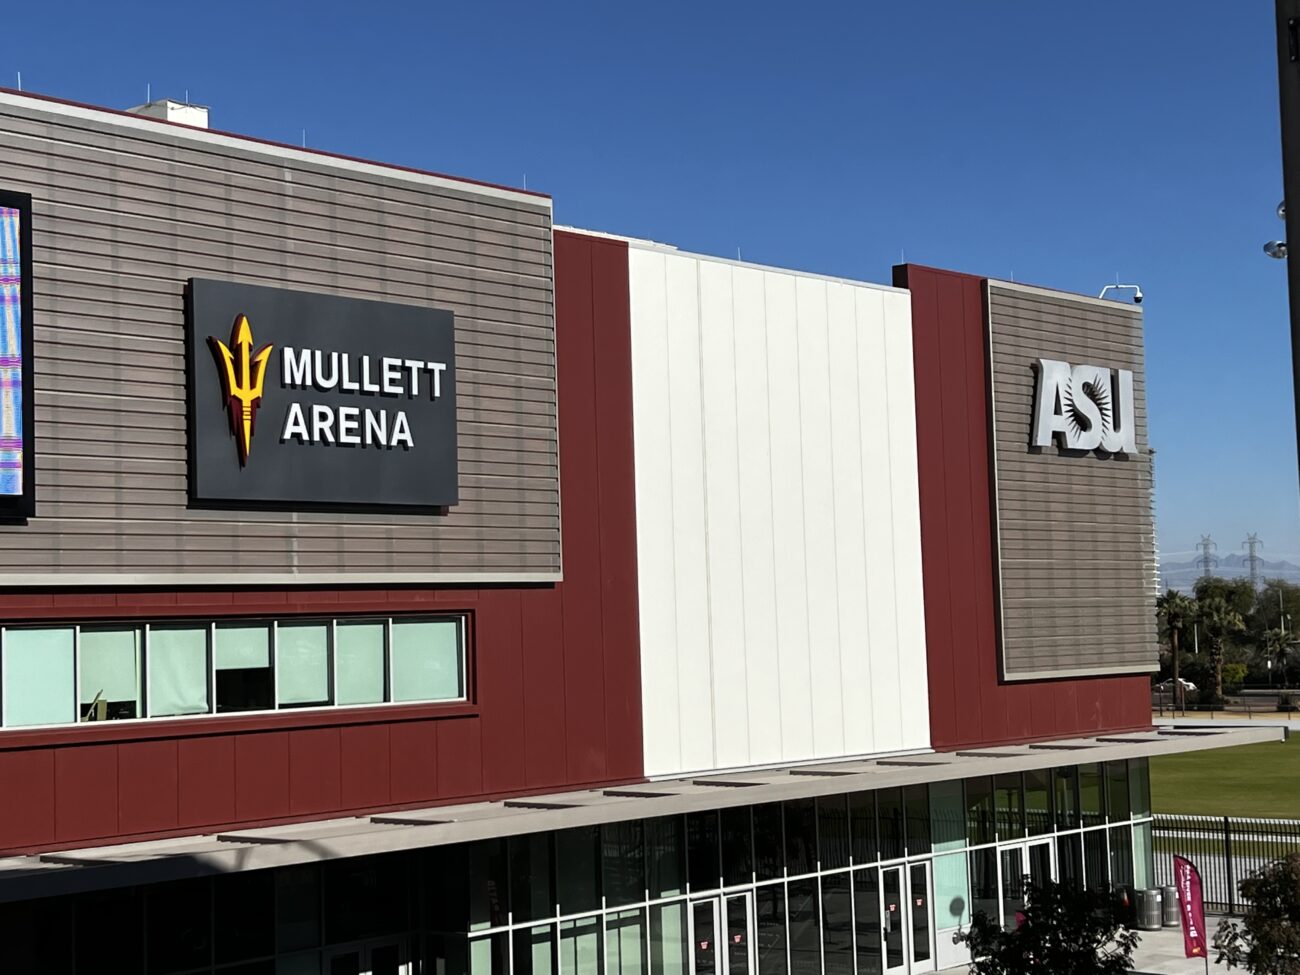 Arizona Coyotes' ticket prices spike at ASU's Mullett Arena